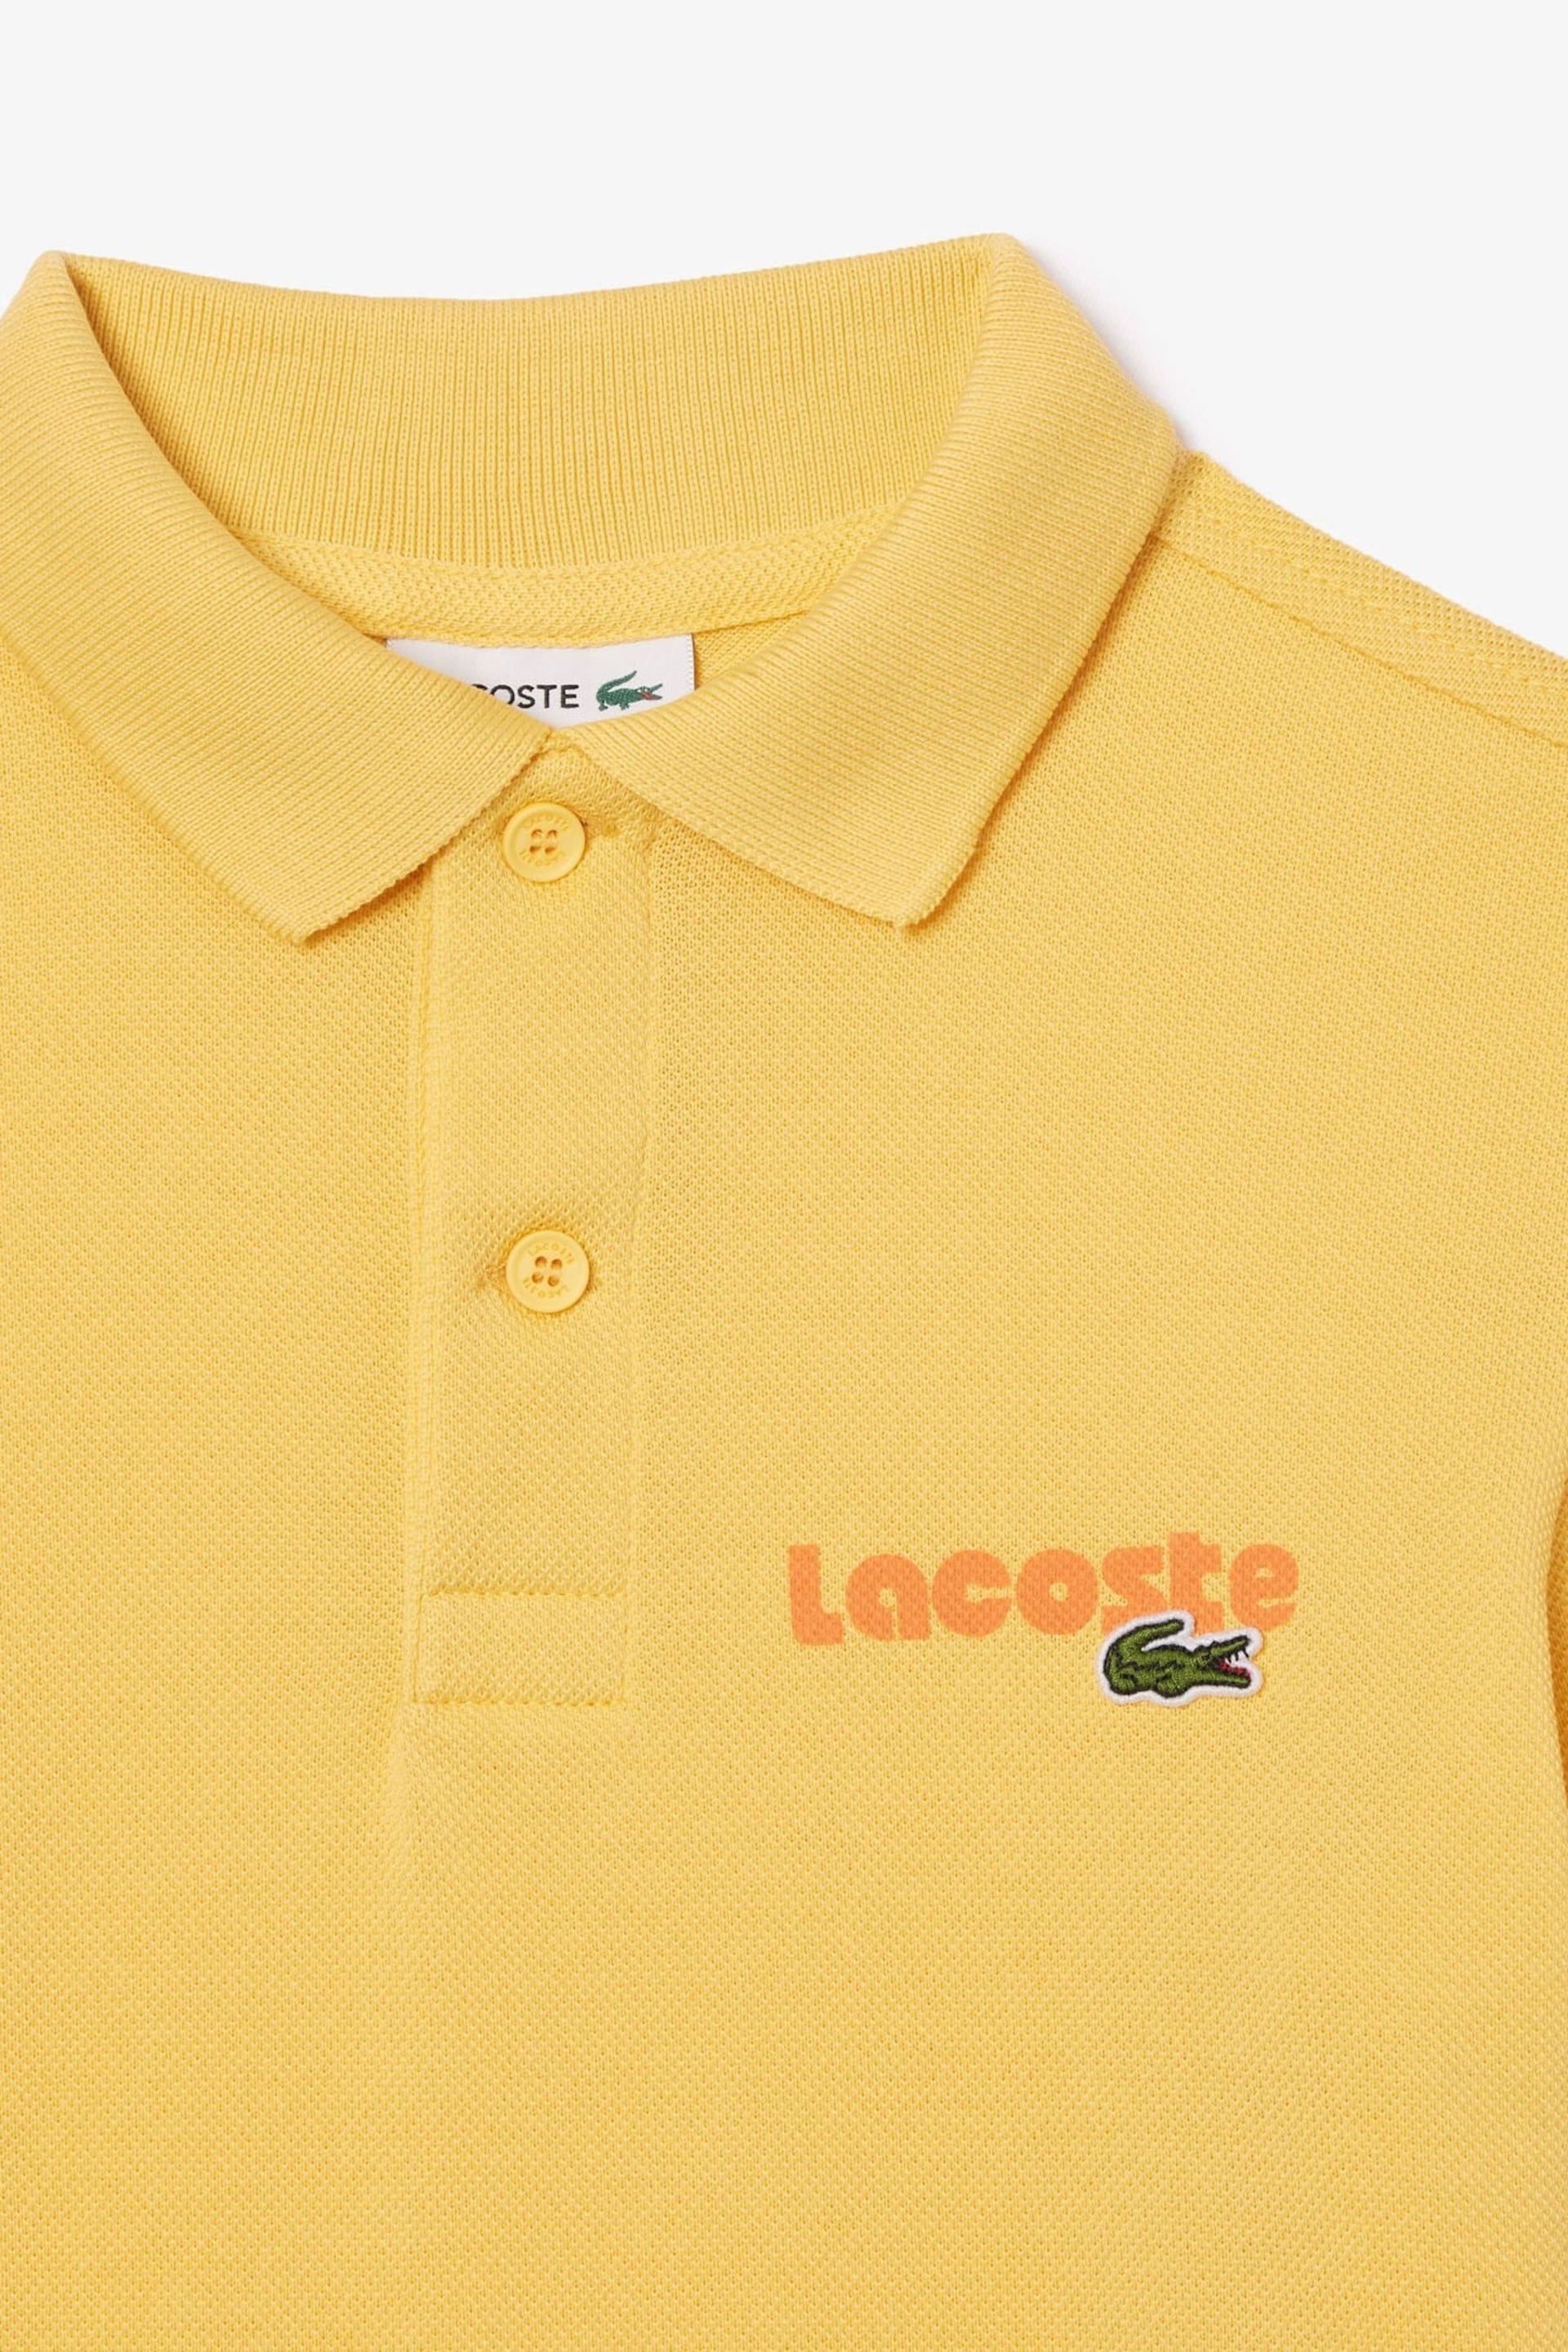 Lacoste Children's Updated Logo Polo Shirt - Image 7 of 7